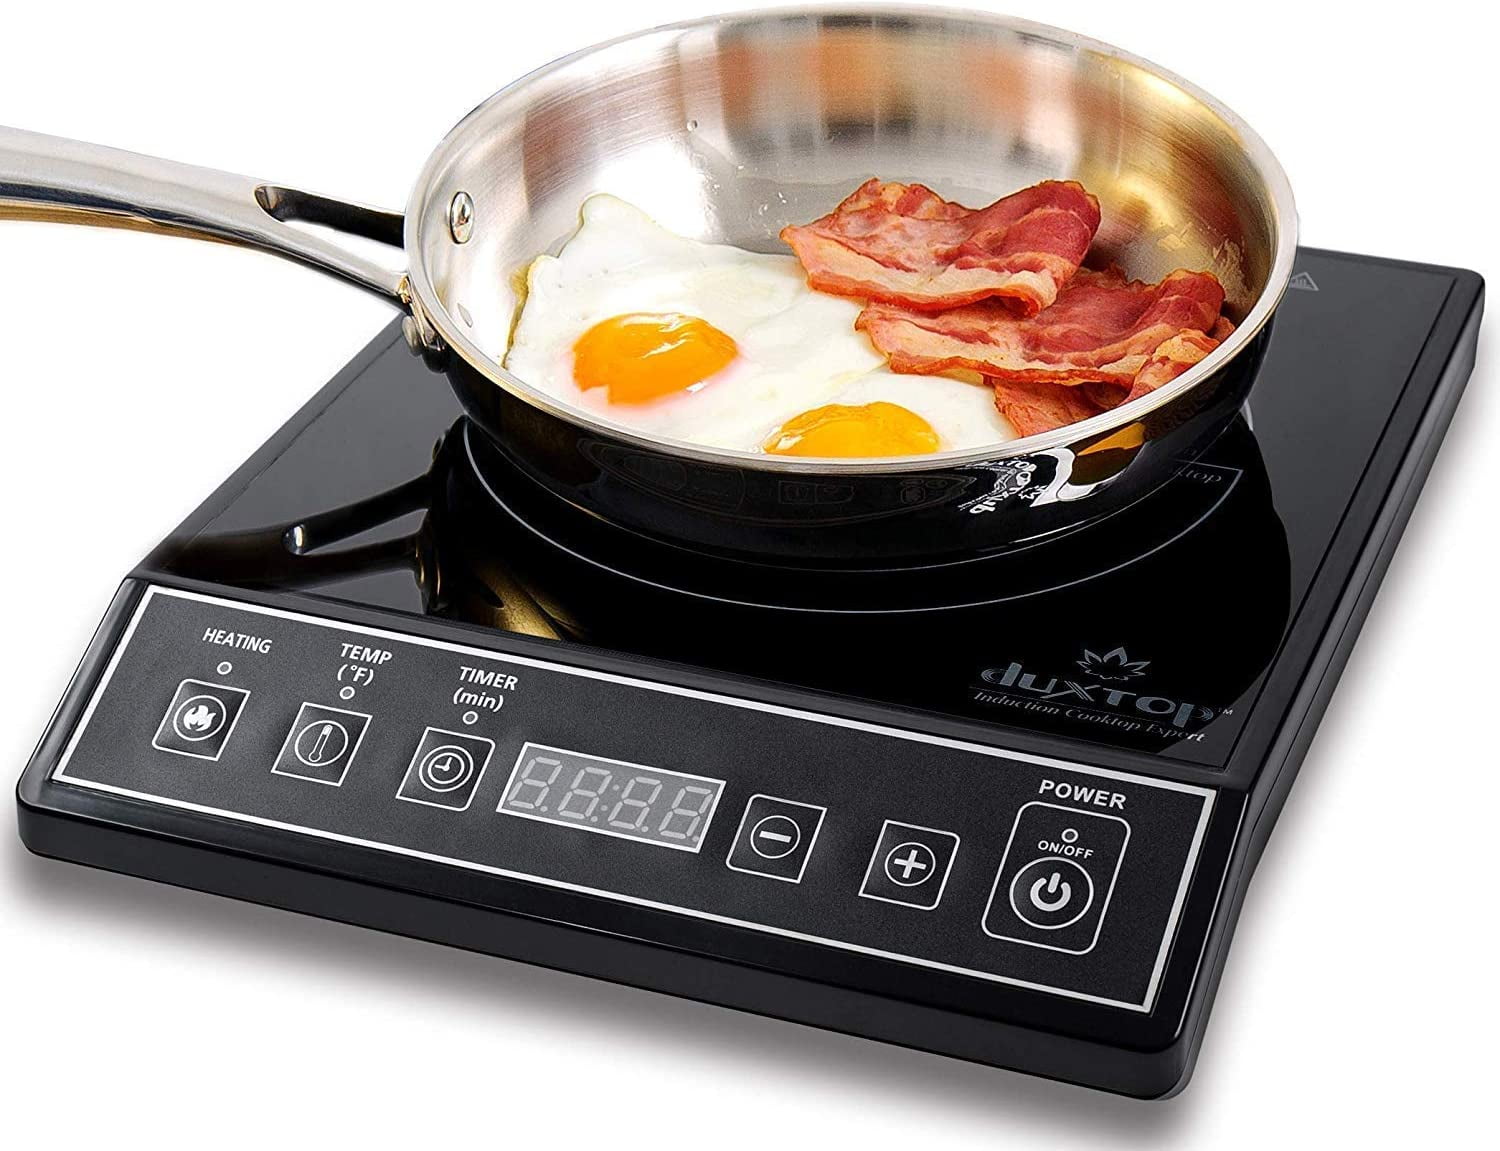 DUXTOP BT-180G3 Duxtop 8100MC 1800W Portable Induction Cooktop, Countertop  Burner Included 5.7 Quarts Professional Stainless Steel Cooking